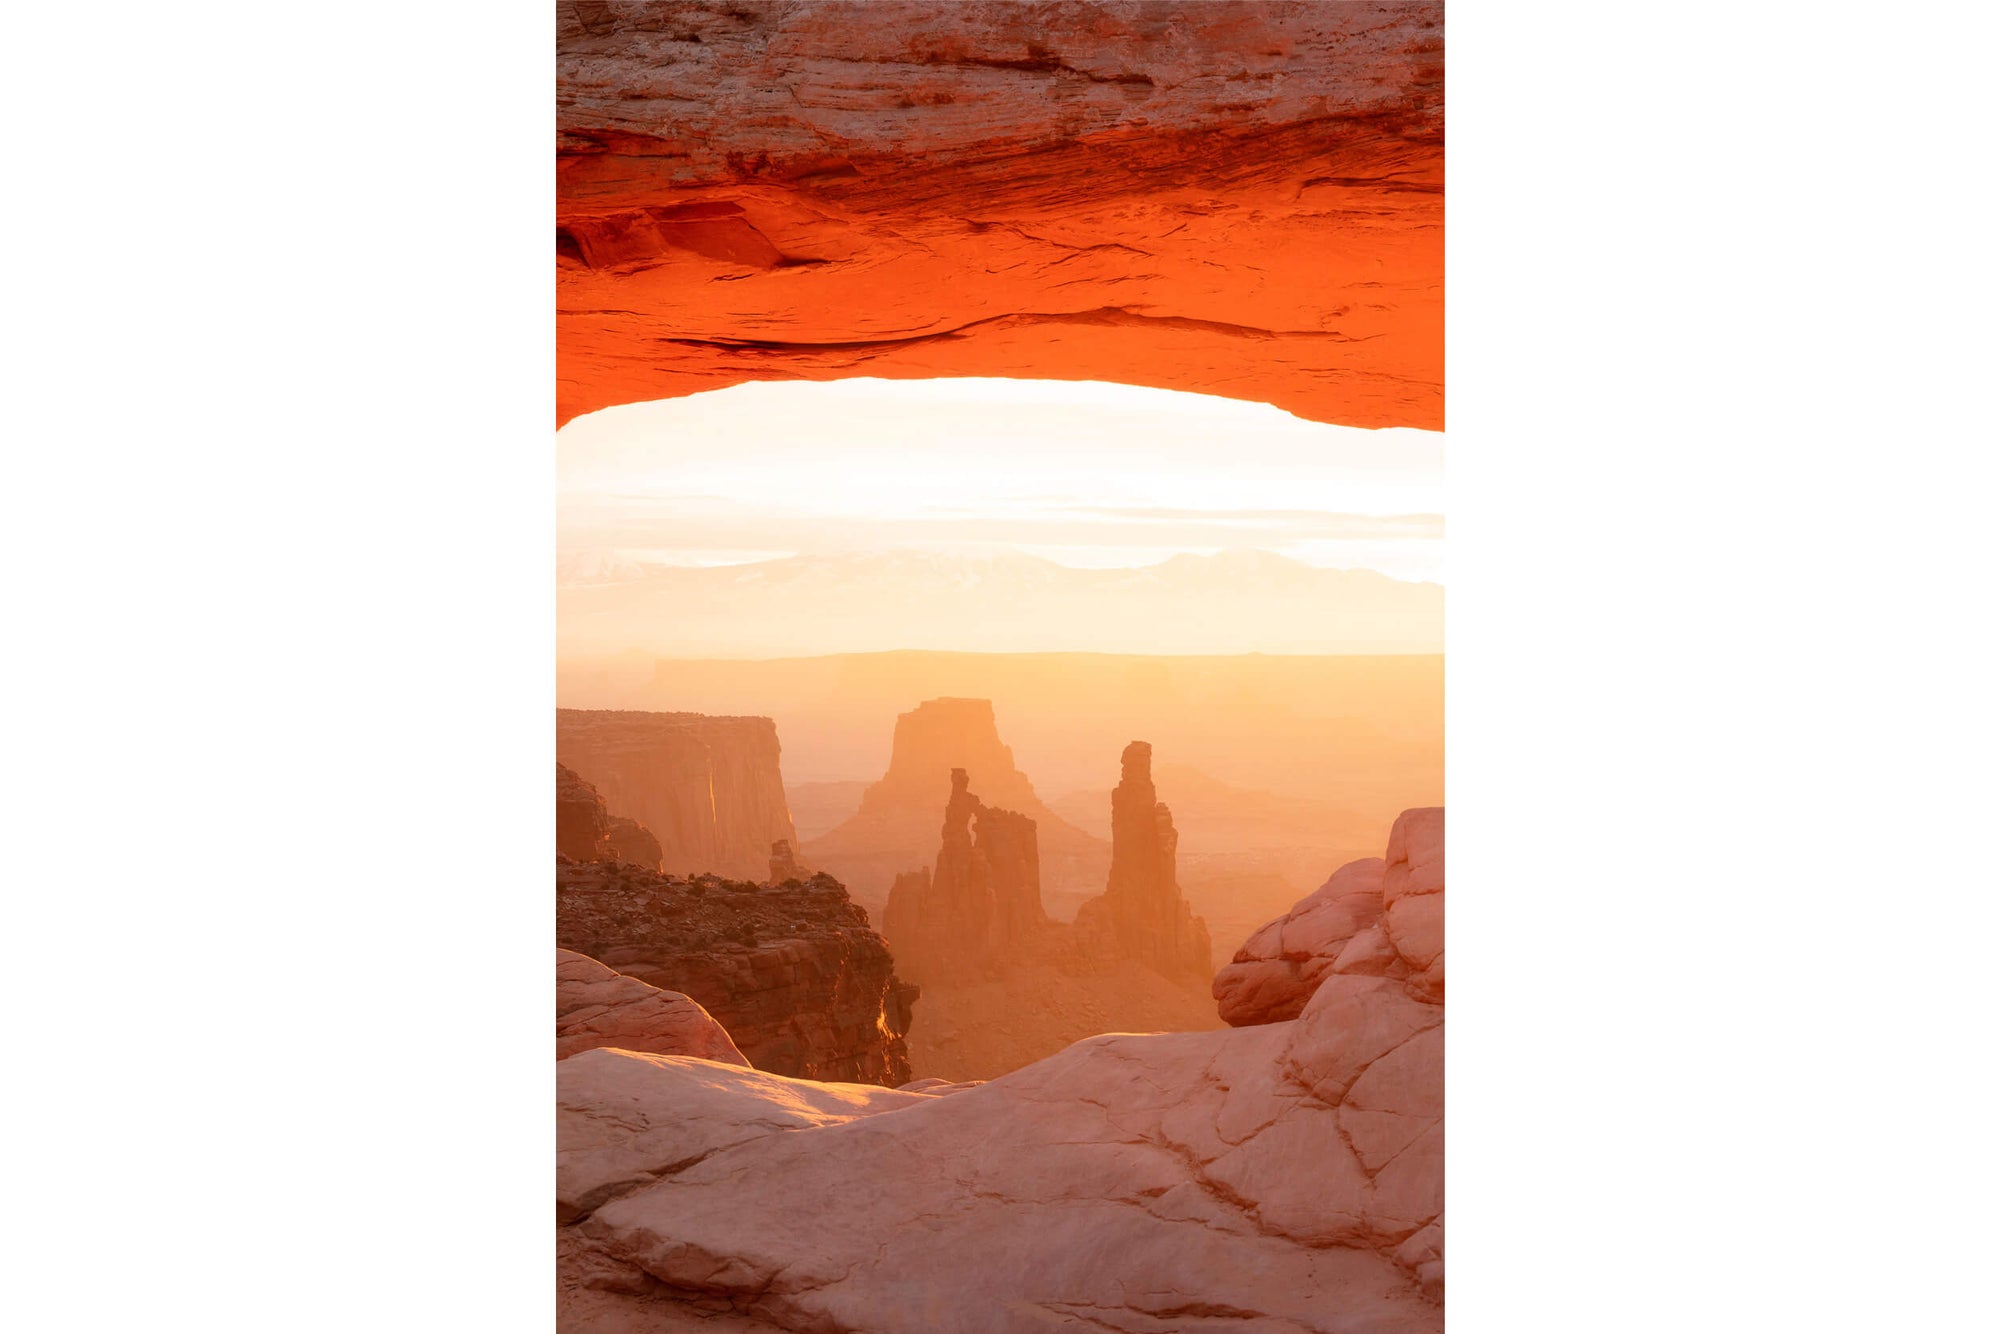 A Mesa Arch picture at sunrise from this hike in Canyonlands National Park in Utah.